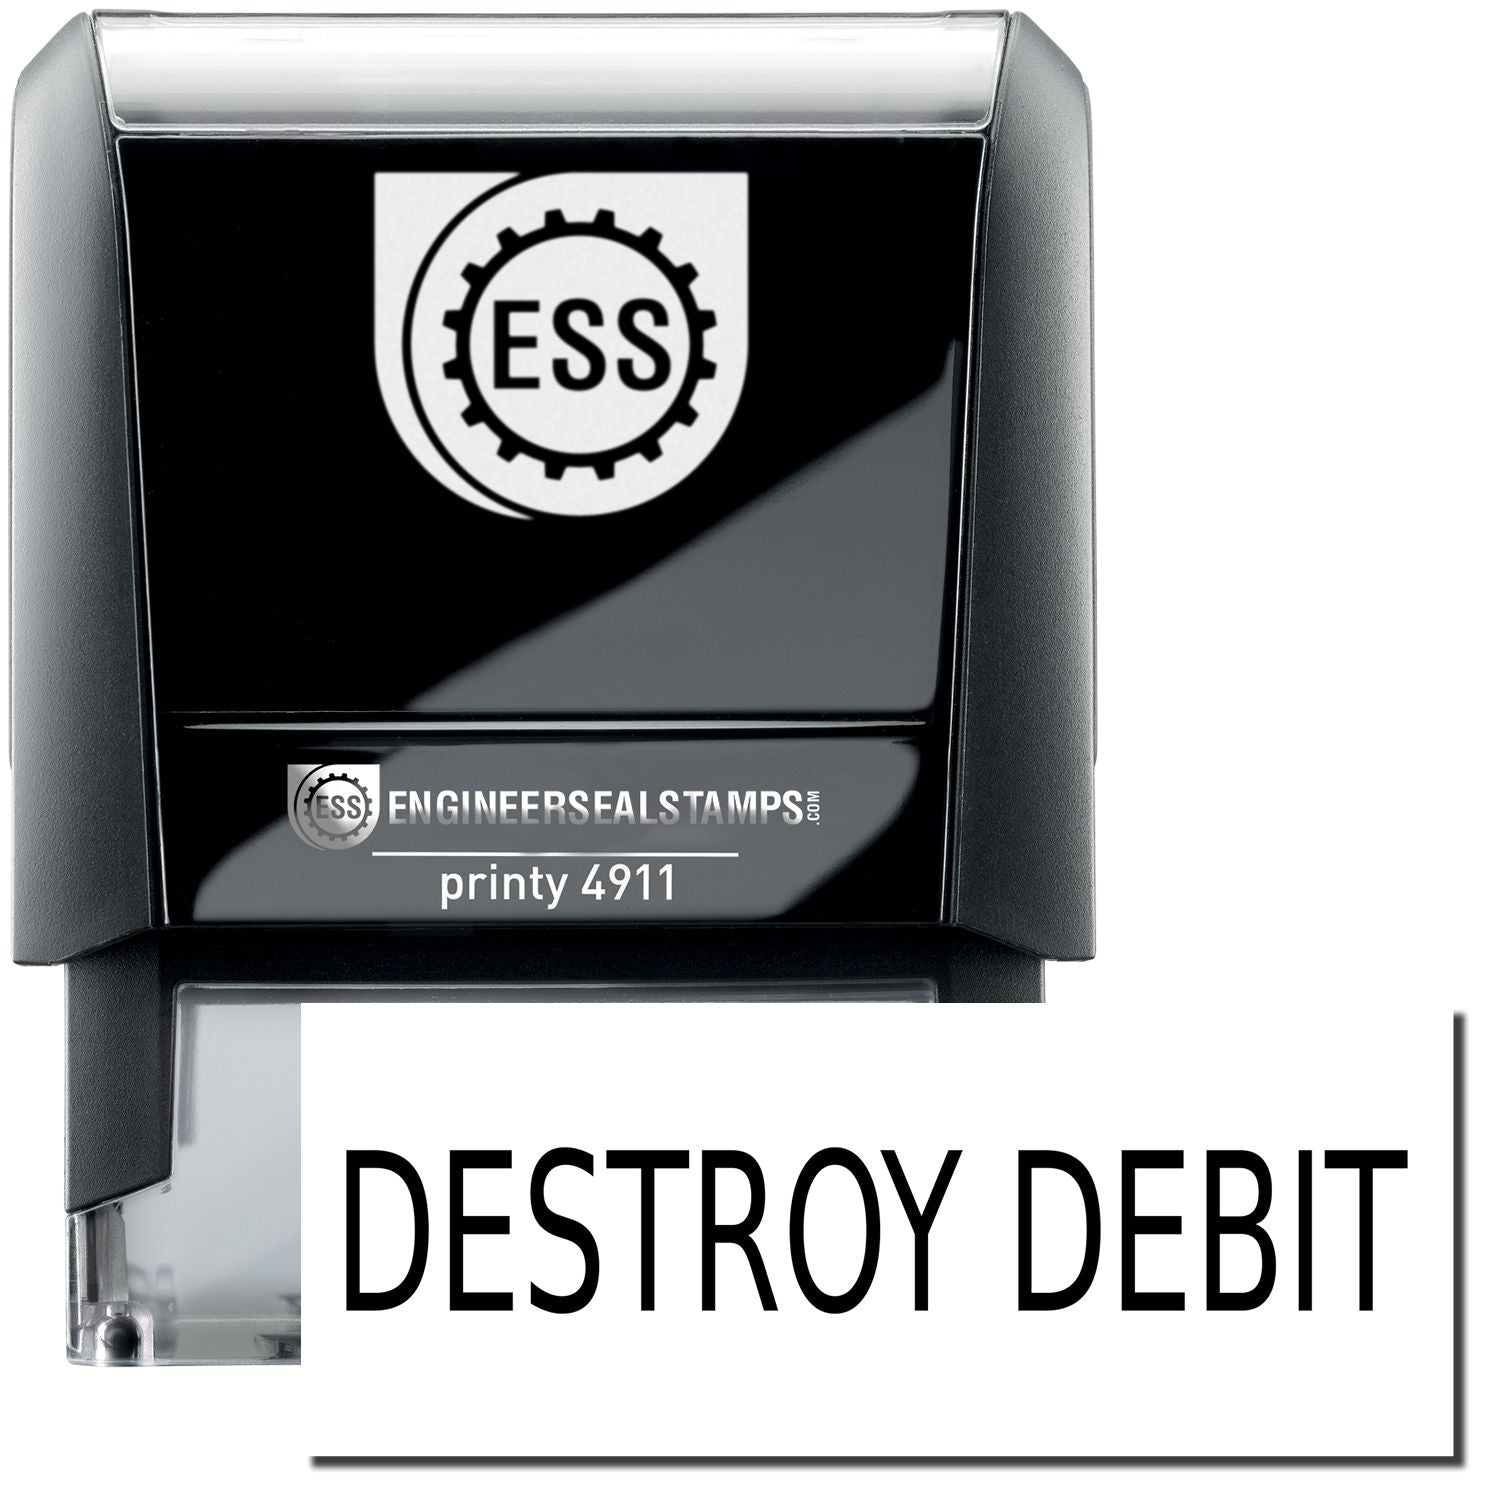 A self-inking stamp with a stamped image showing how the text "DESTROY DEBIT" is displayed after stamping.